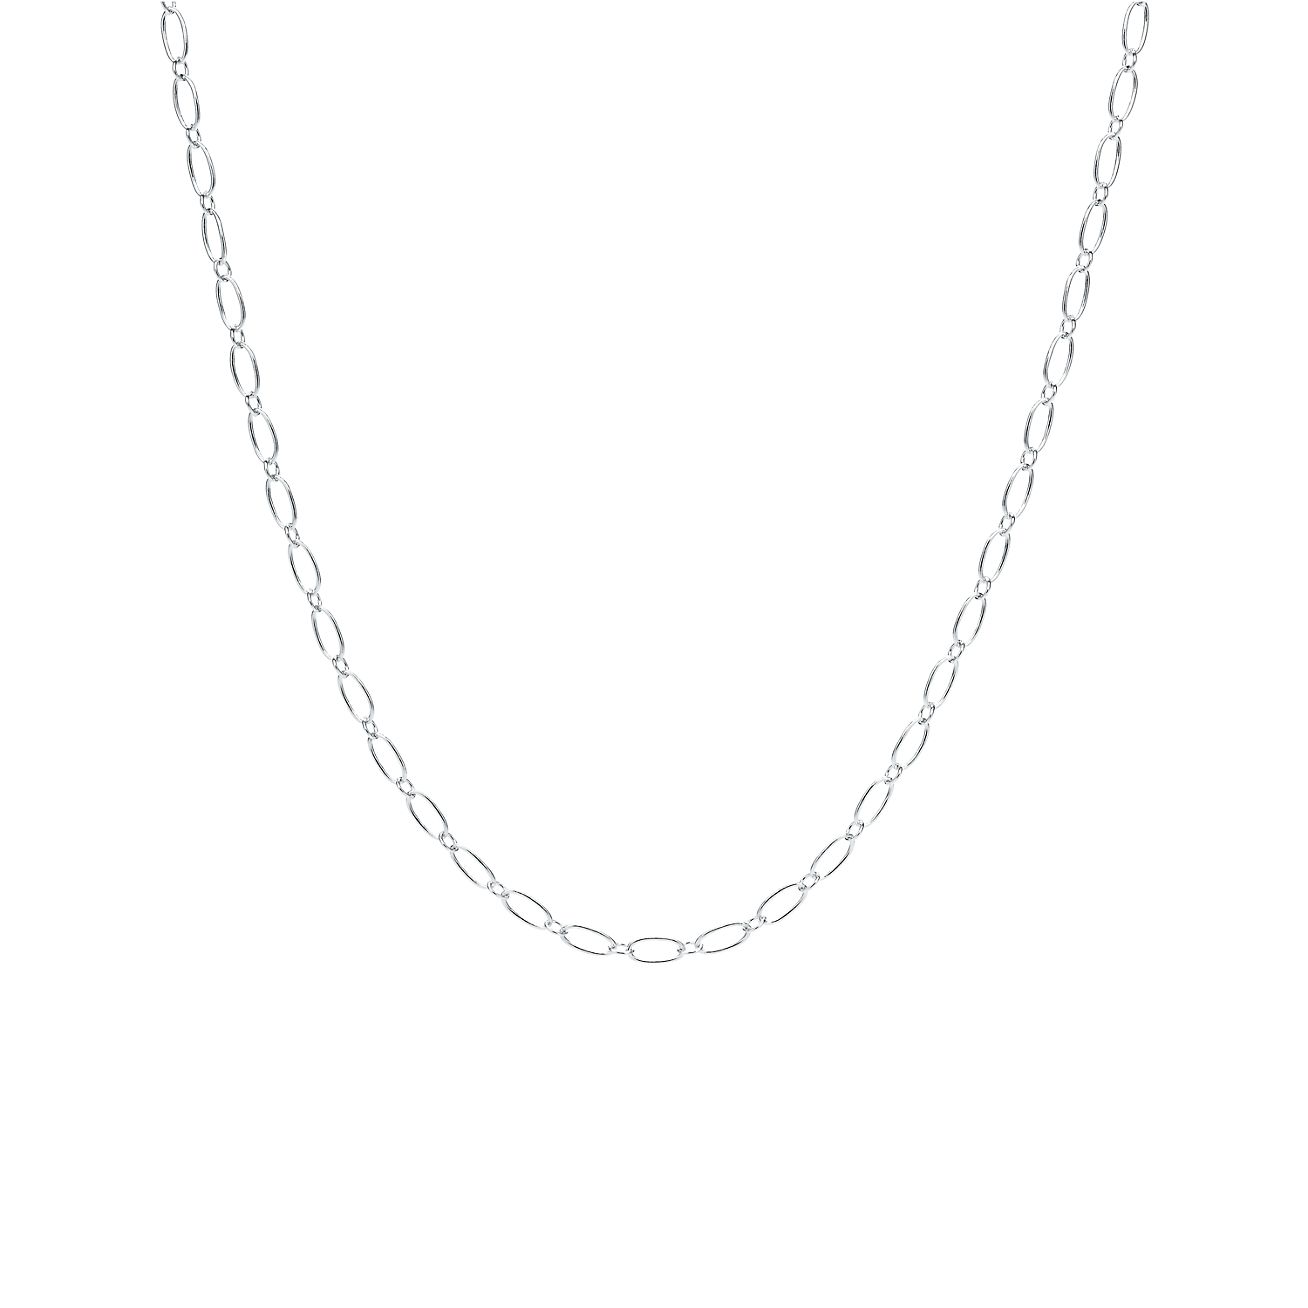 oval link chain tiffany